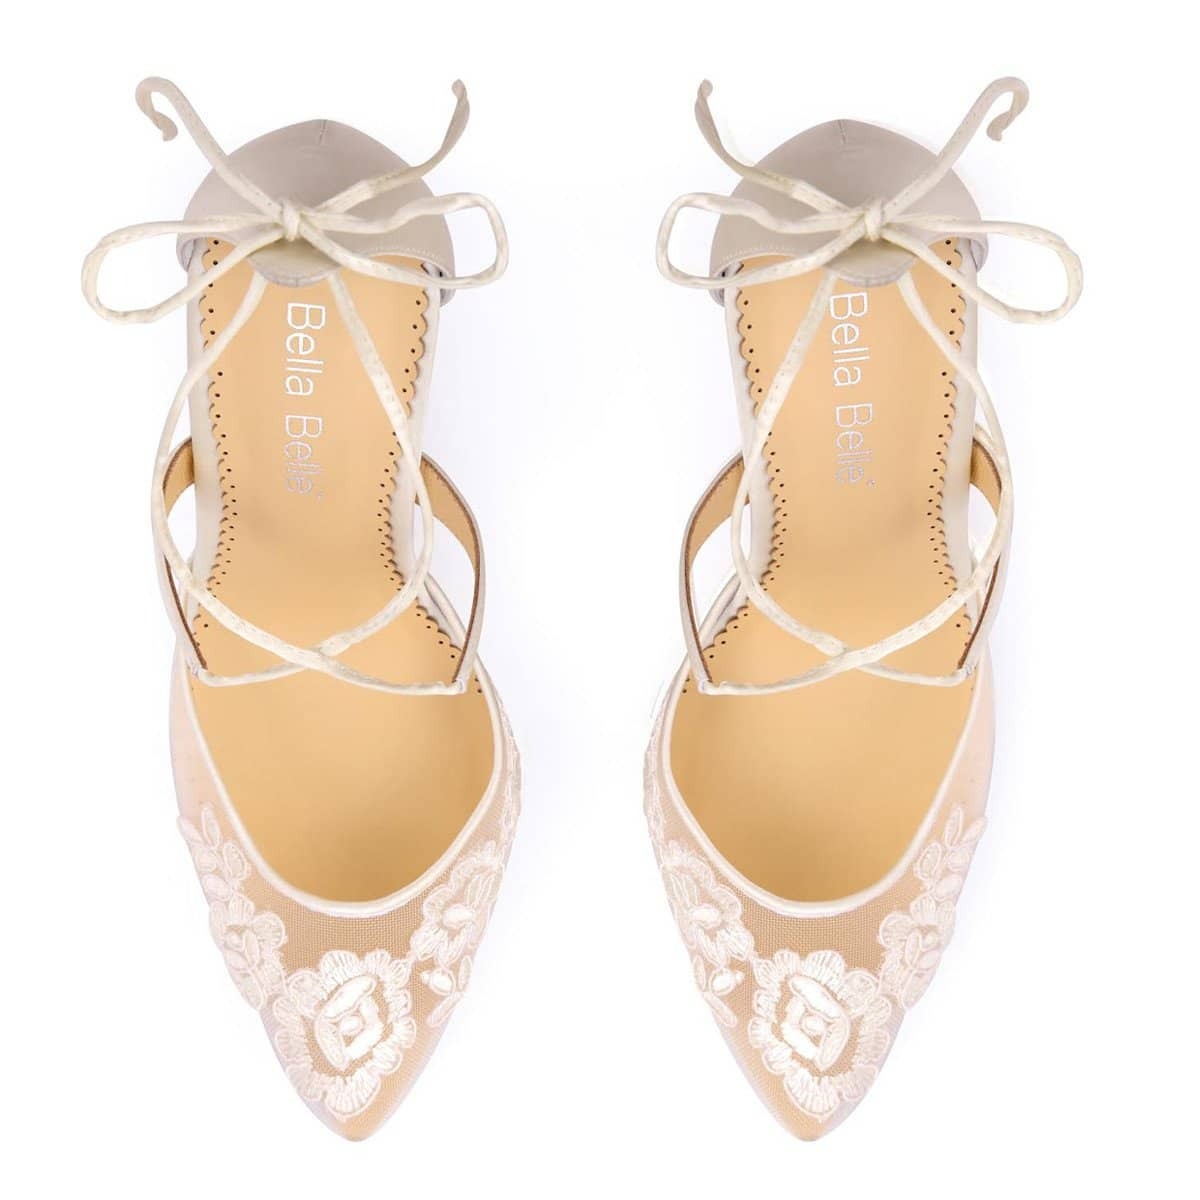 Anita Lace Wedding Shoes in Ivory by Bella Belle Shoes